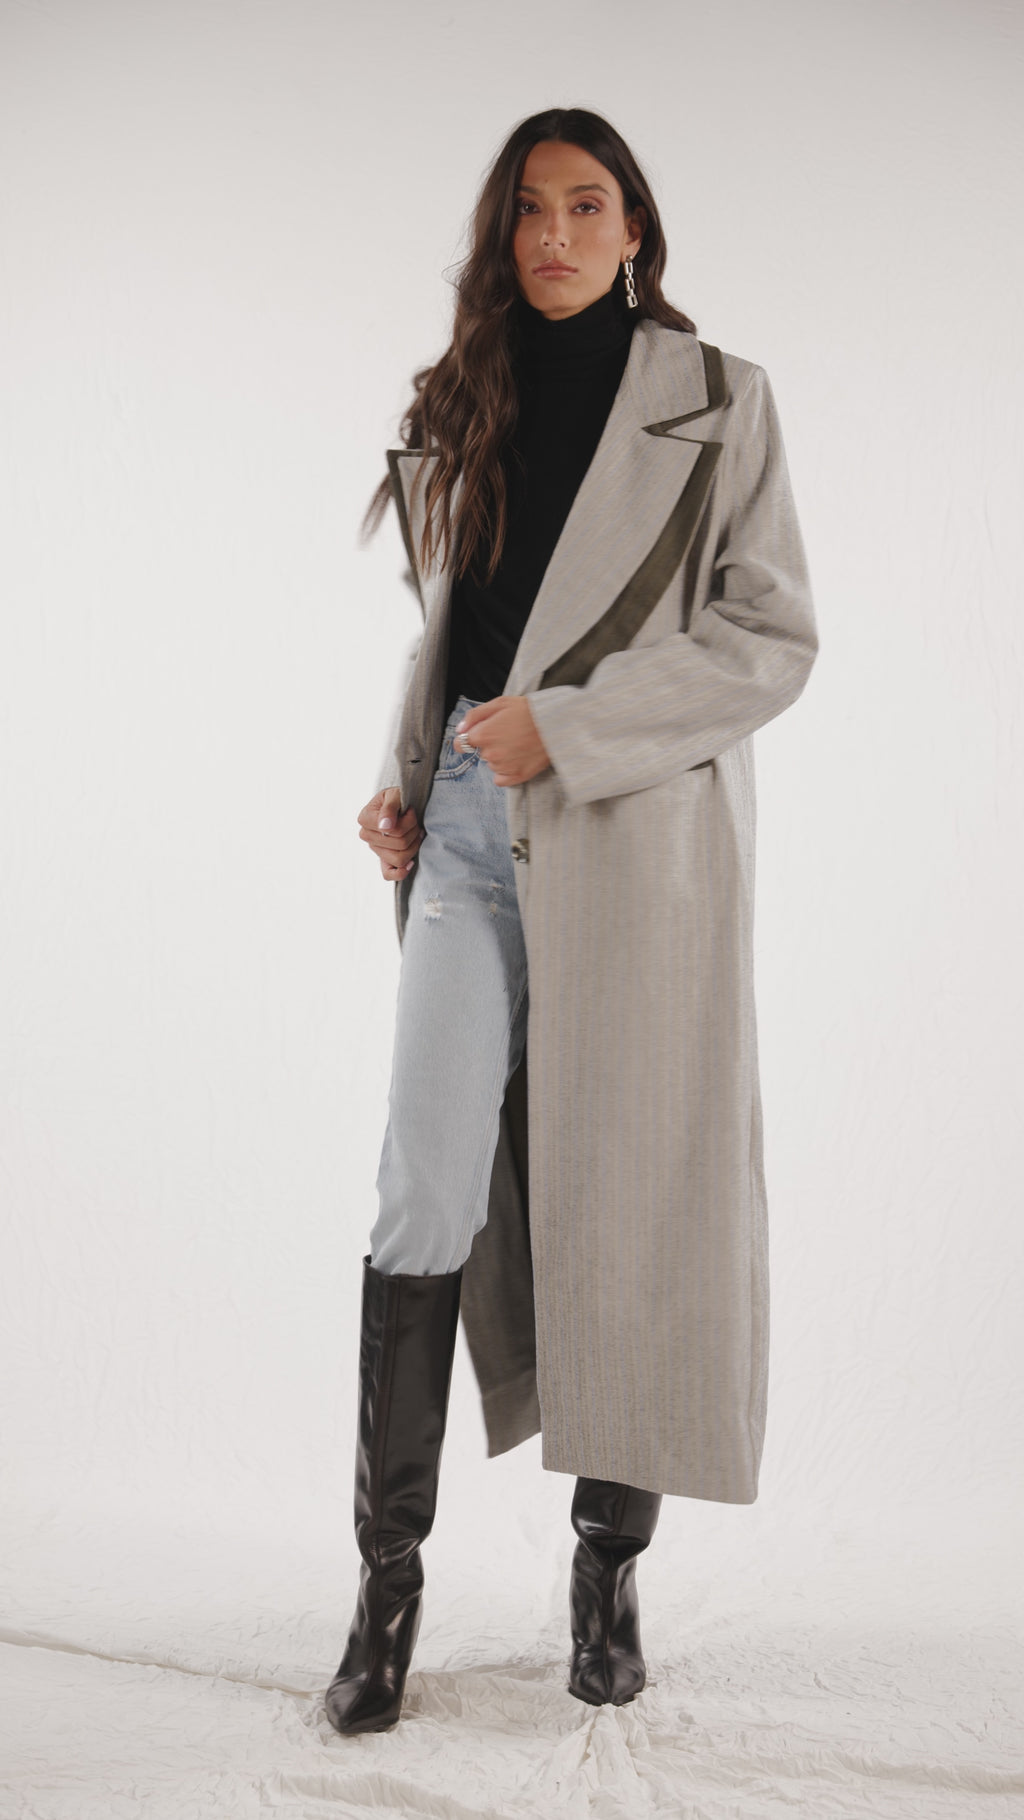 Maxi Grey and Dark green cotton trench coat with open back - Custom Made - Bastet Noir